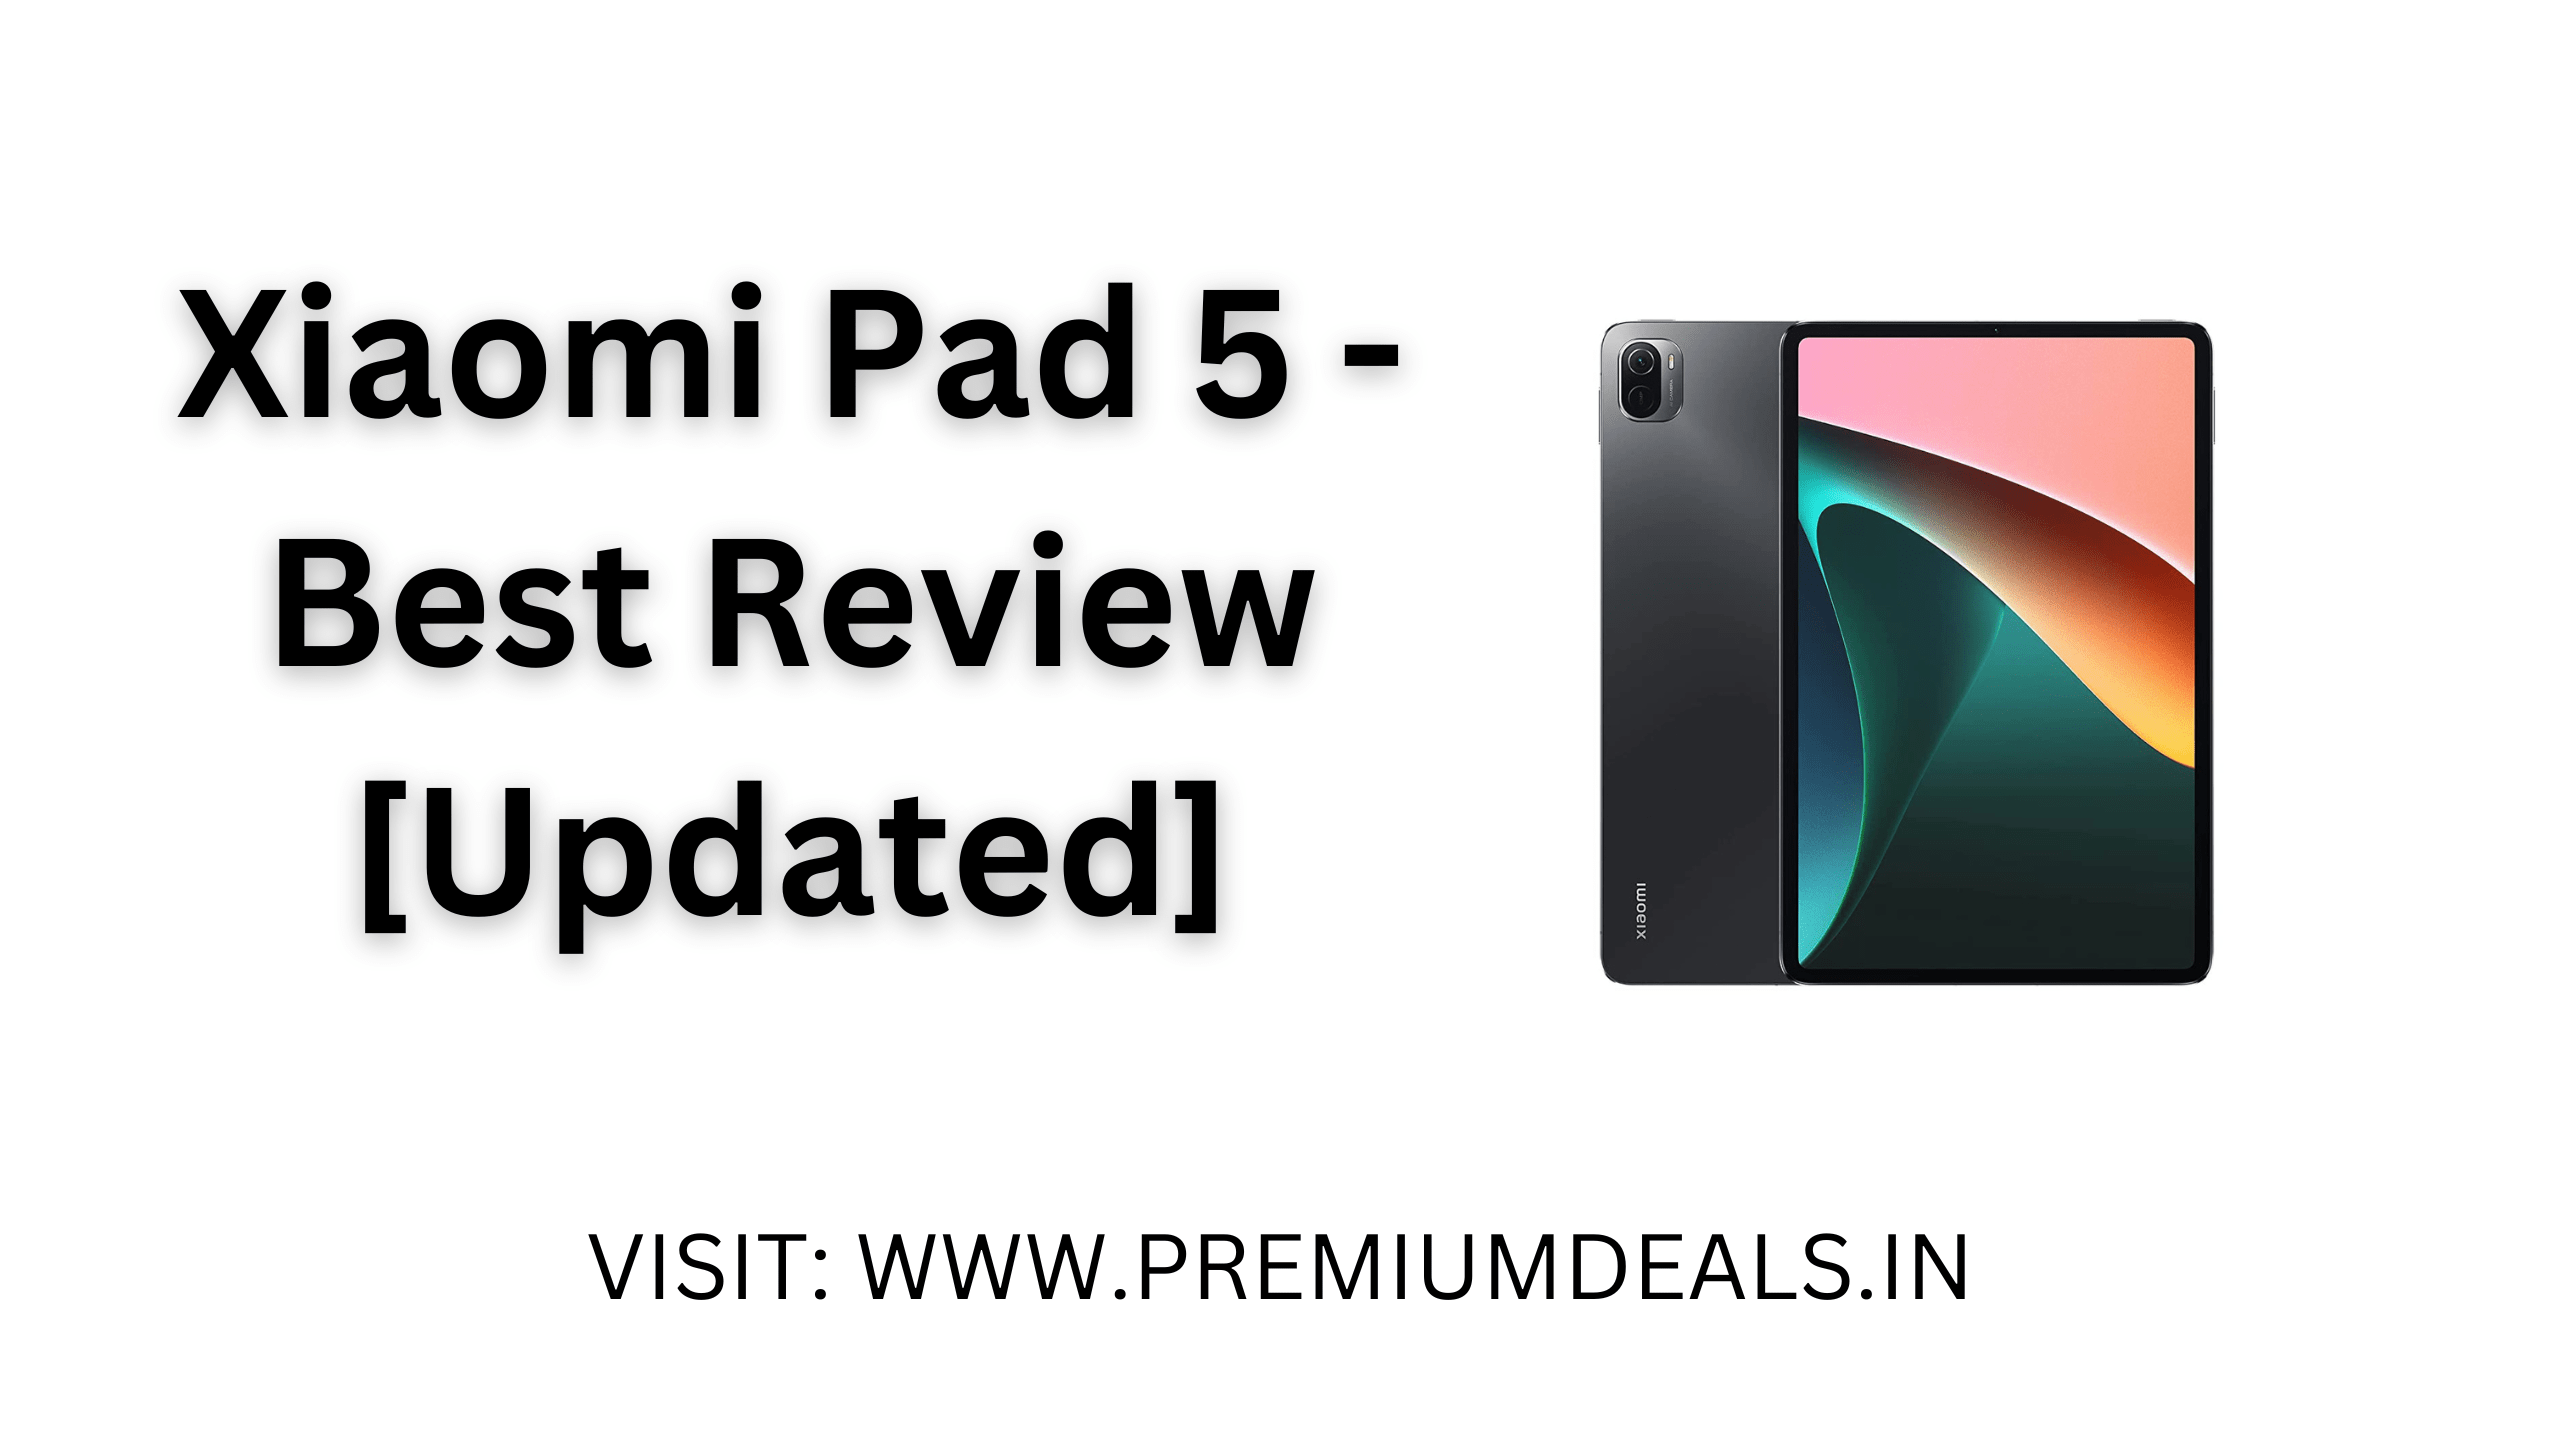 Xiaomi Pad 5 - Best Review [Updated]